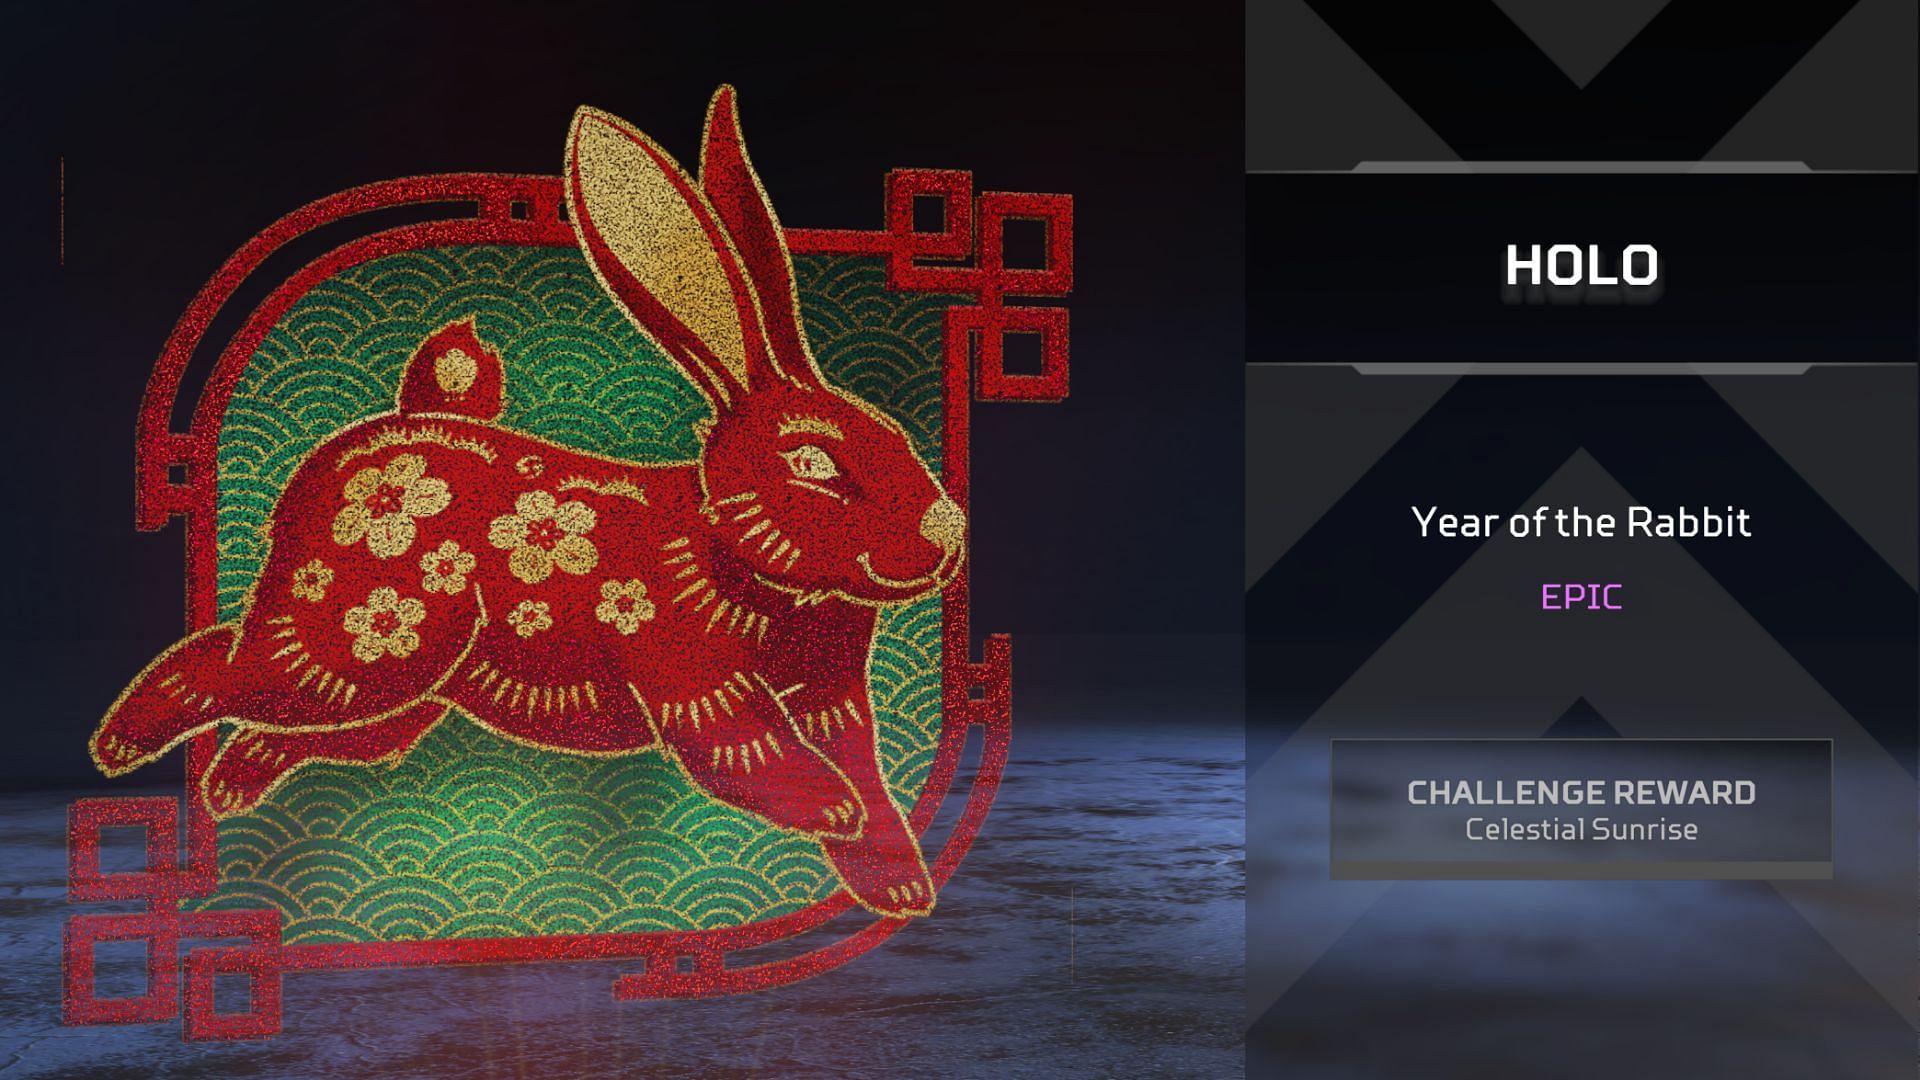 The Year of the Rabbit Holospray in Apex Legends (Image via EA)